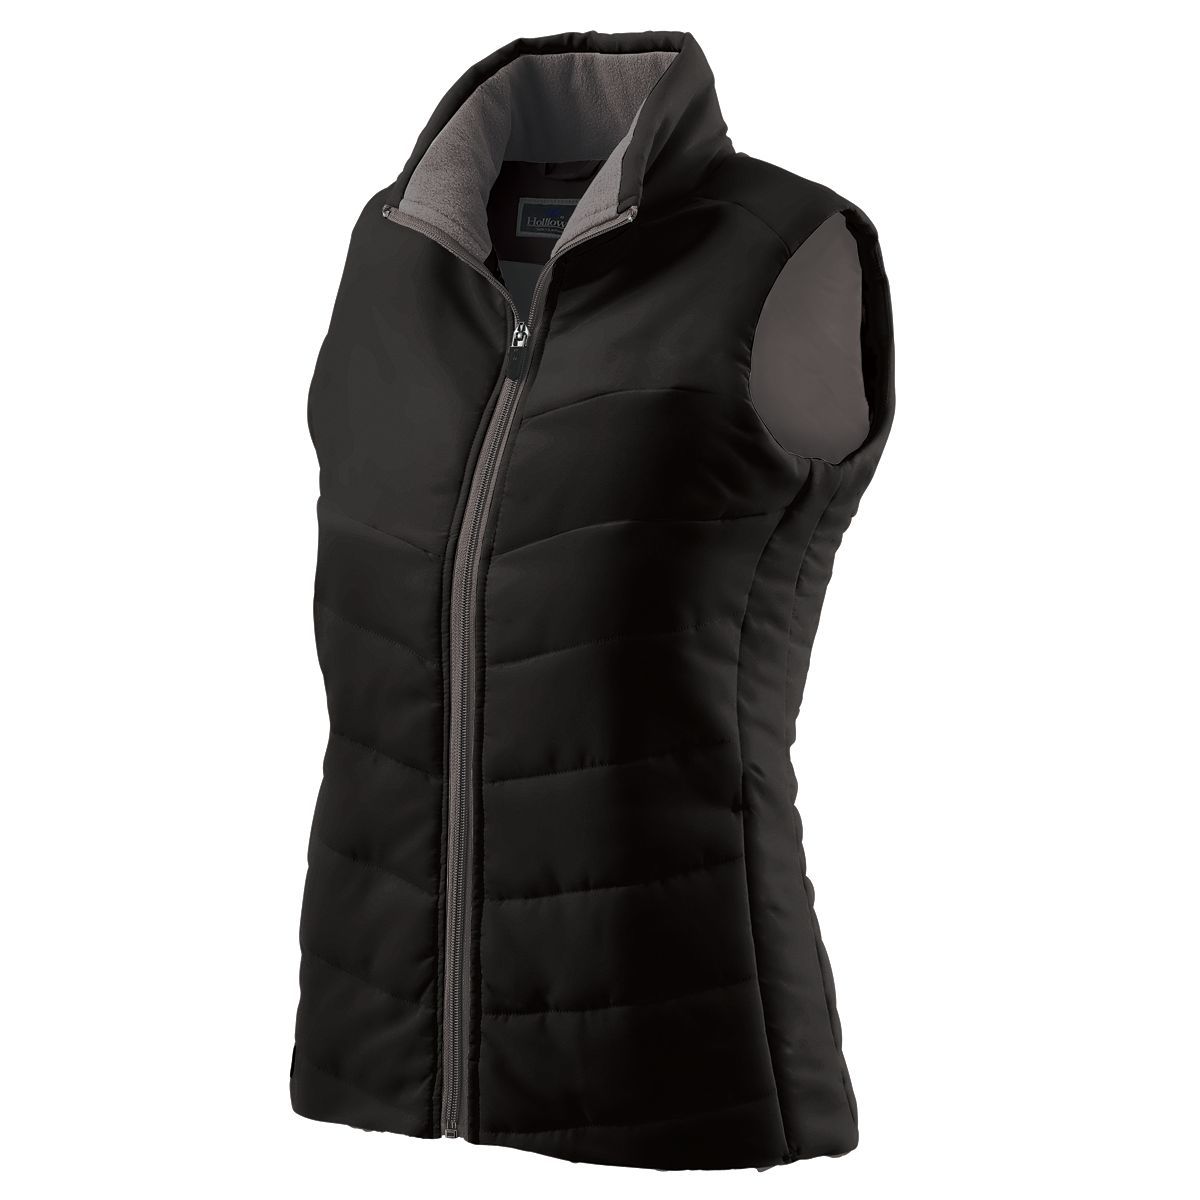 Holloway Ladies Admire Vest in Black  -Part of the Ladies, Holloway, Outerwear product lines at KanaleyCreations.com